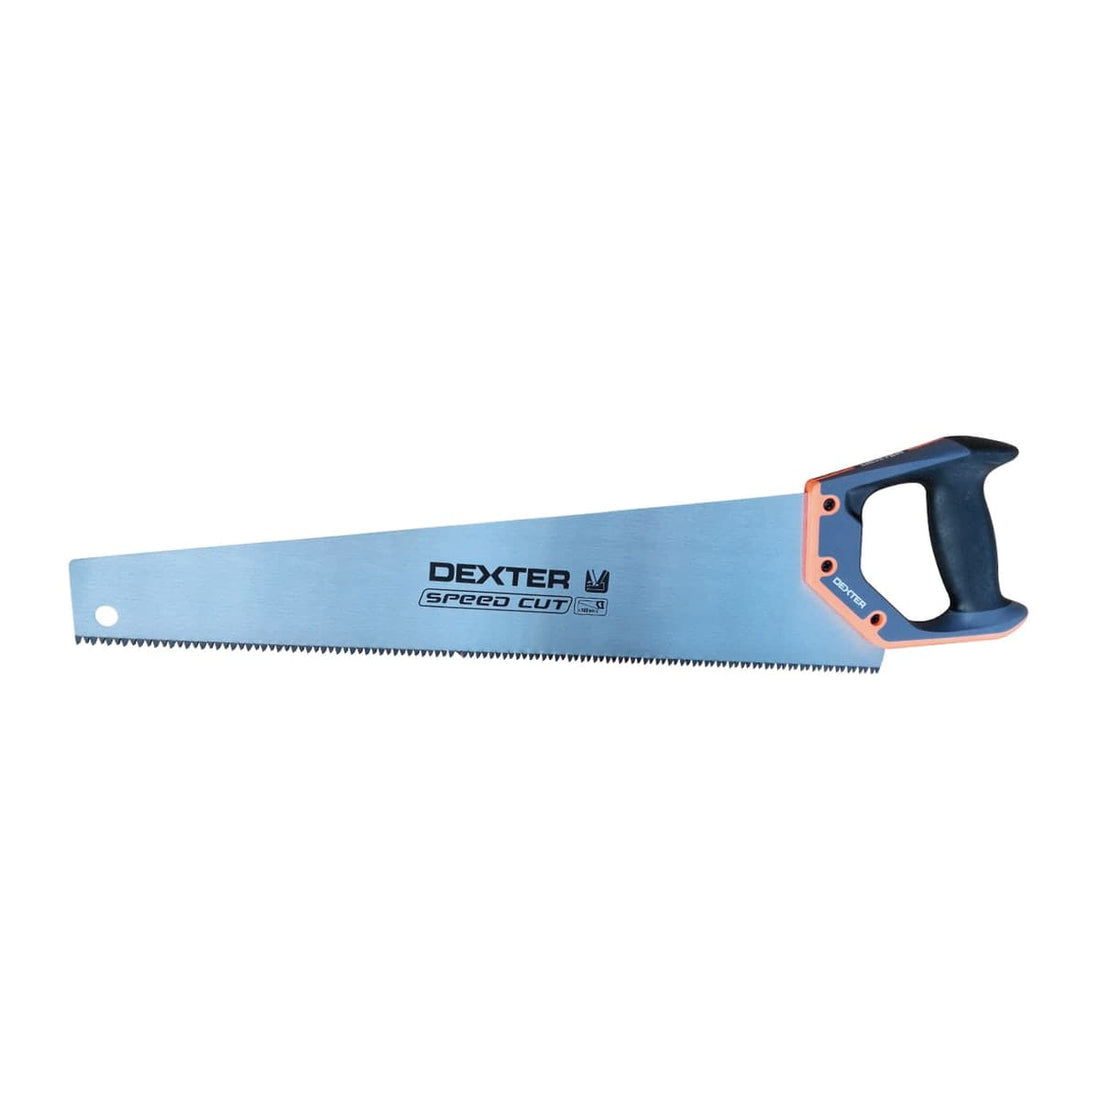 DEXTER SAW 500 MM FOR WOOD RUBBER GRIP, STEEL BLADE TOOTHING